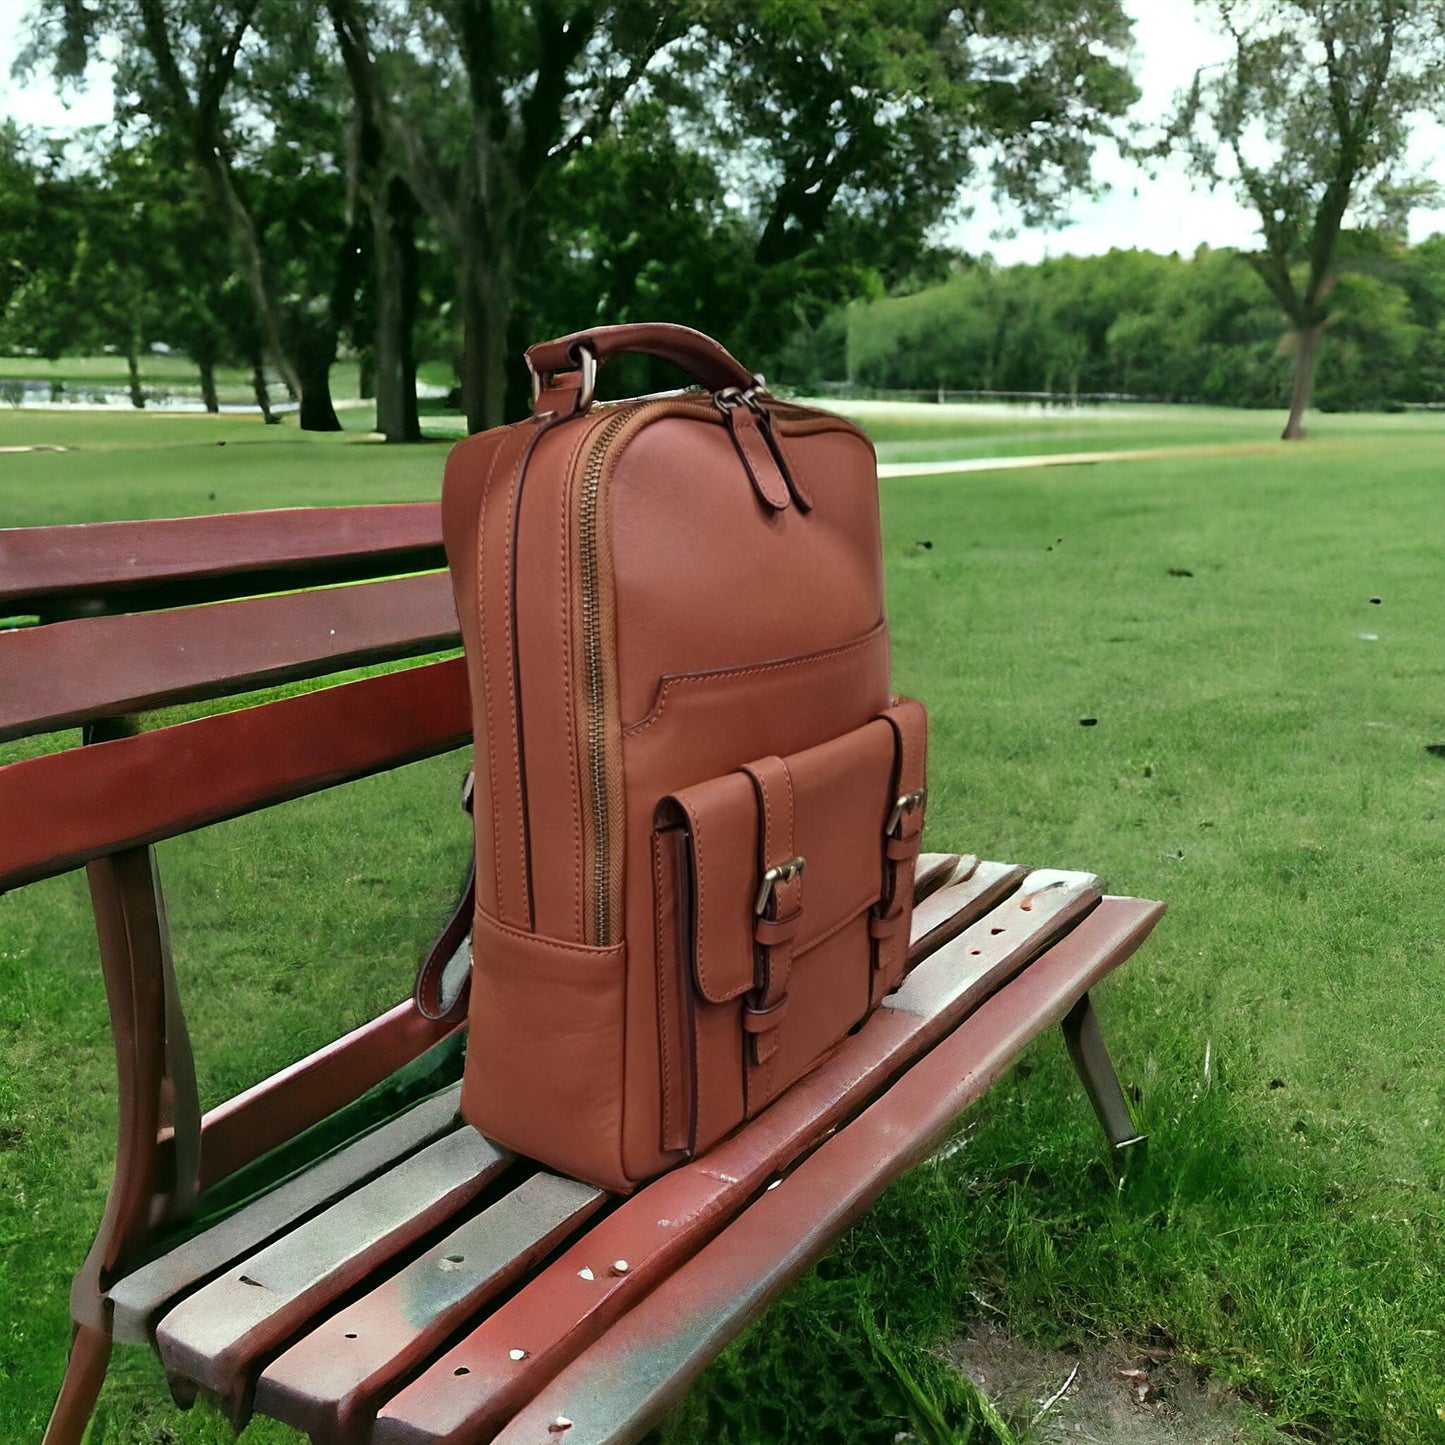 Full Leather Handmade Daypack, Brown,Tan,Black, Blue color, 20L - 30 L options. Laptop pocket premimum leather, Citypack, Daily use  99percenthandmade   